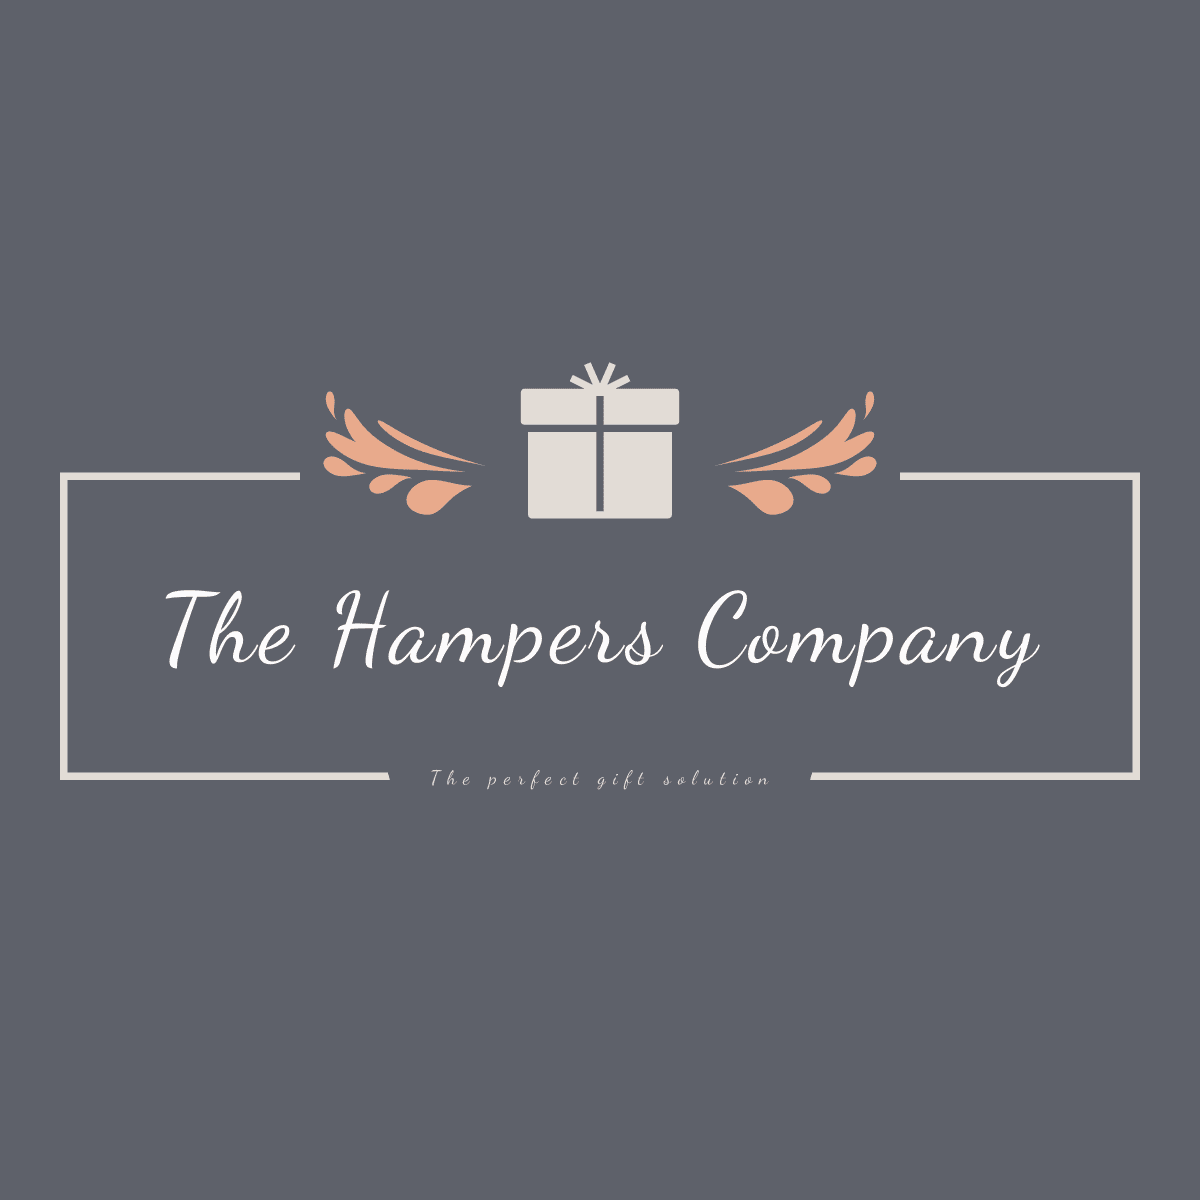 The Hampers Company